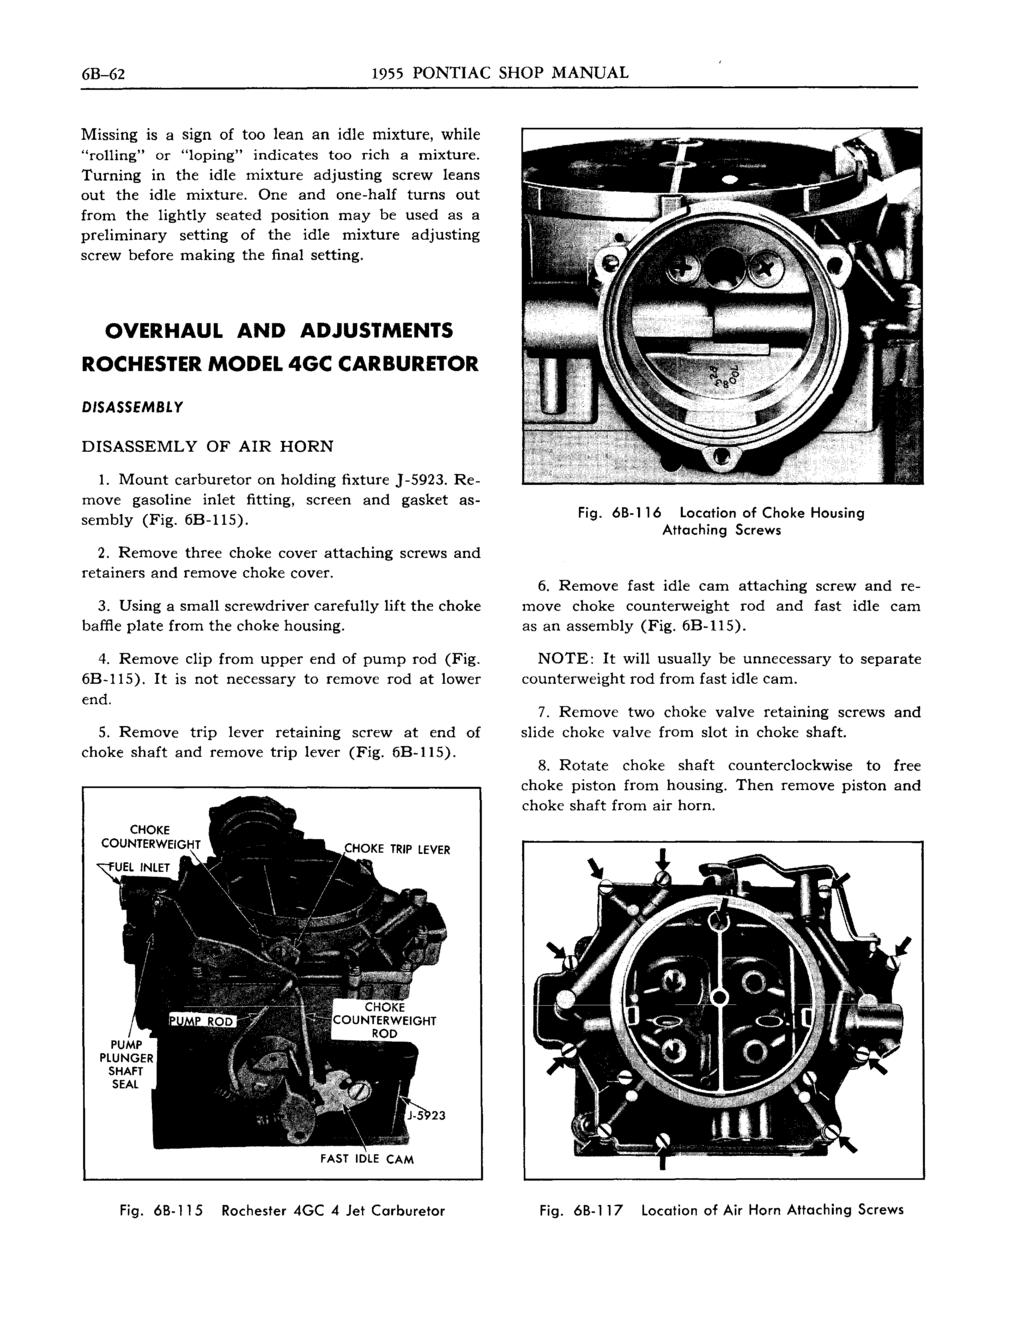 6B-62 1955 PONTIAC SHOP MANUAL Missing is a sign of too lean an idle mixture, while "rolling" or "loping" indicates too rich a mixture.